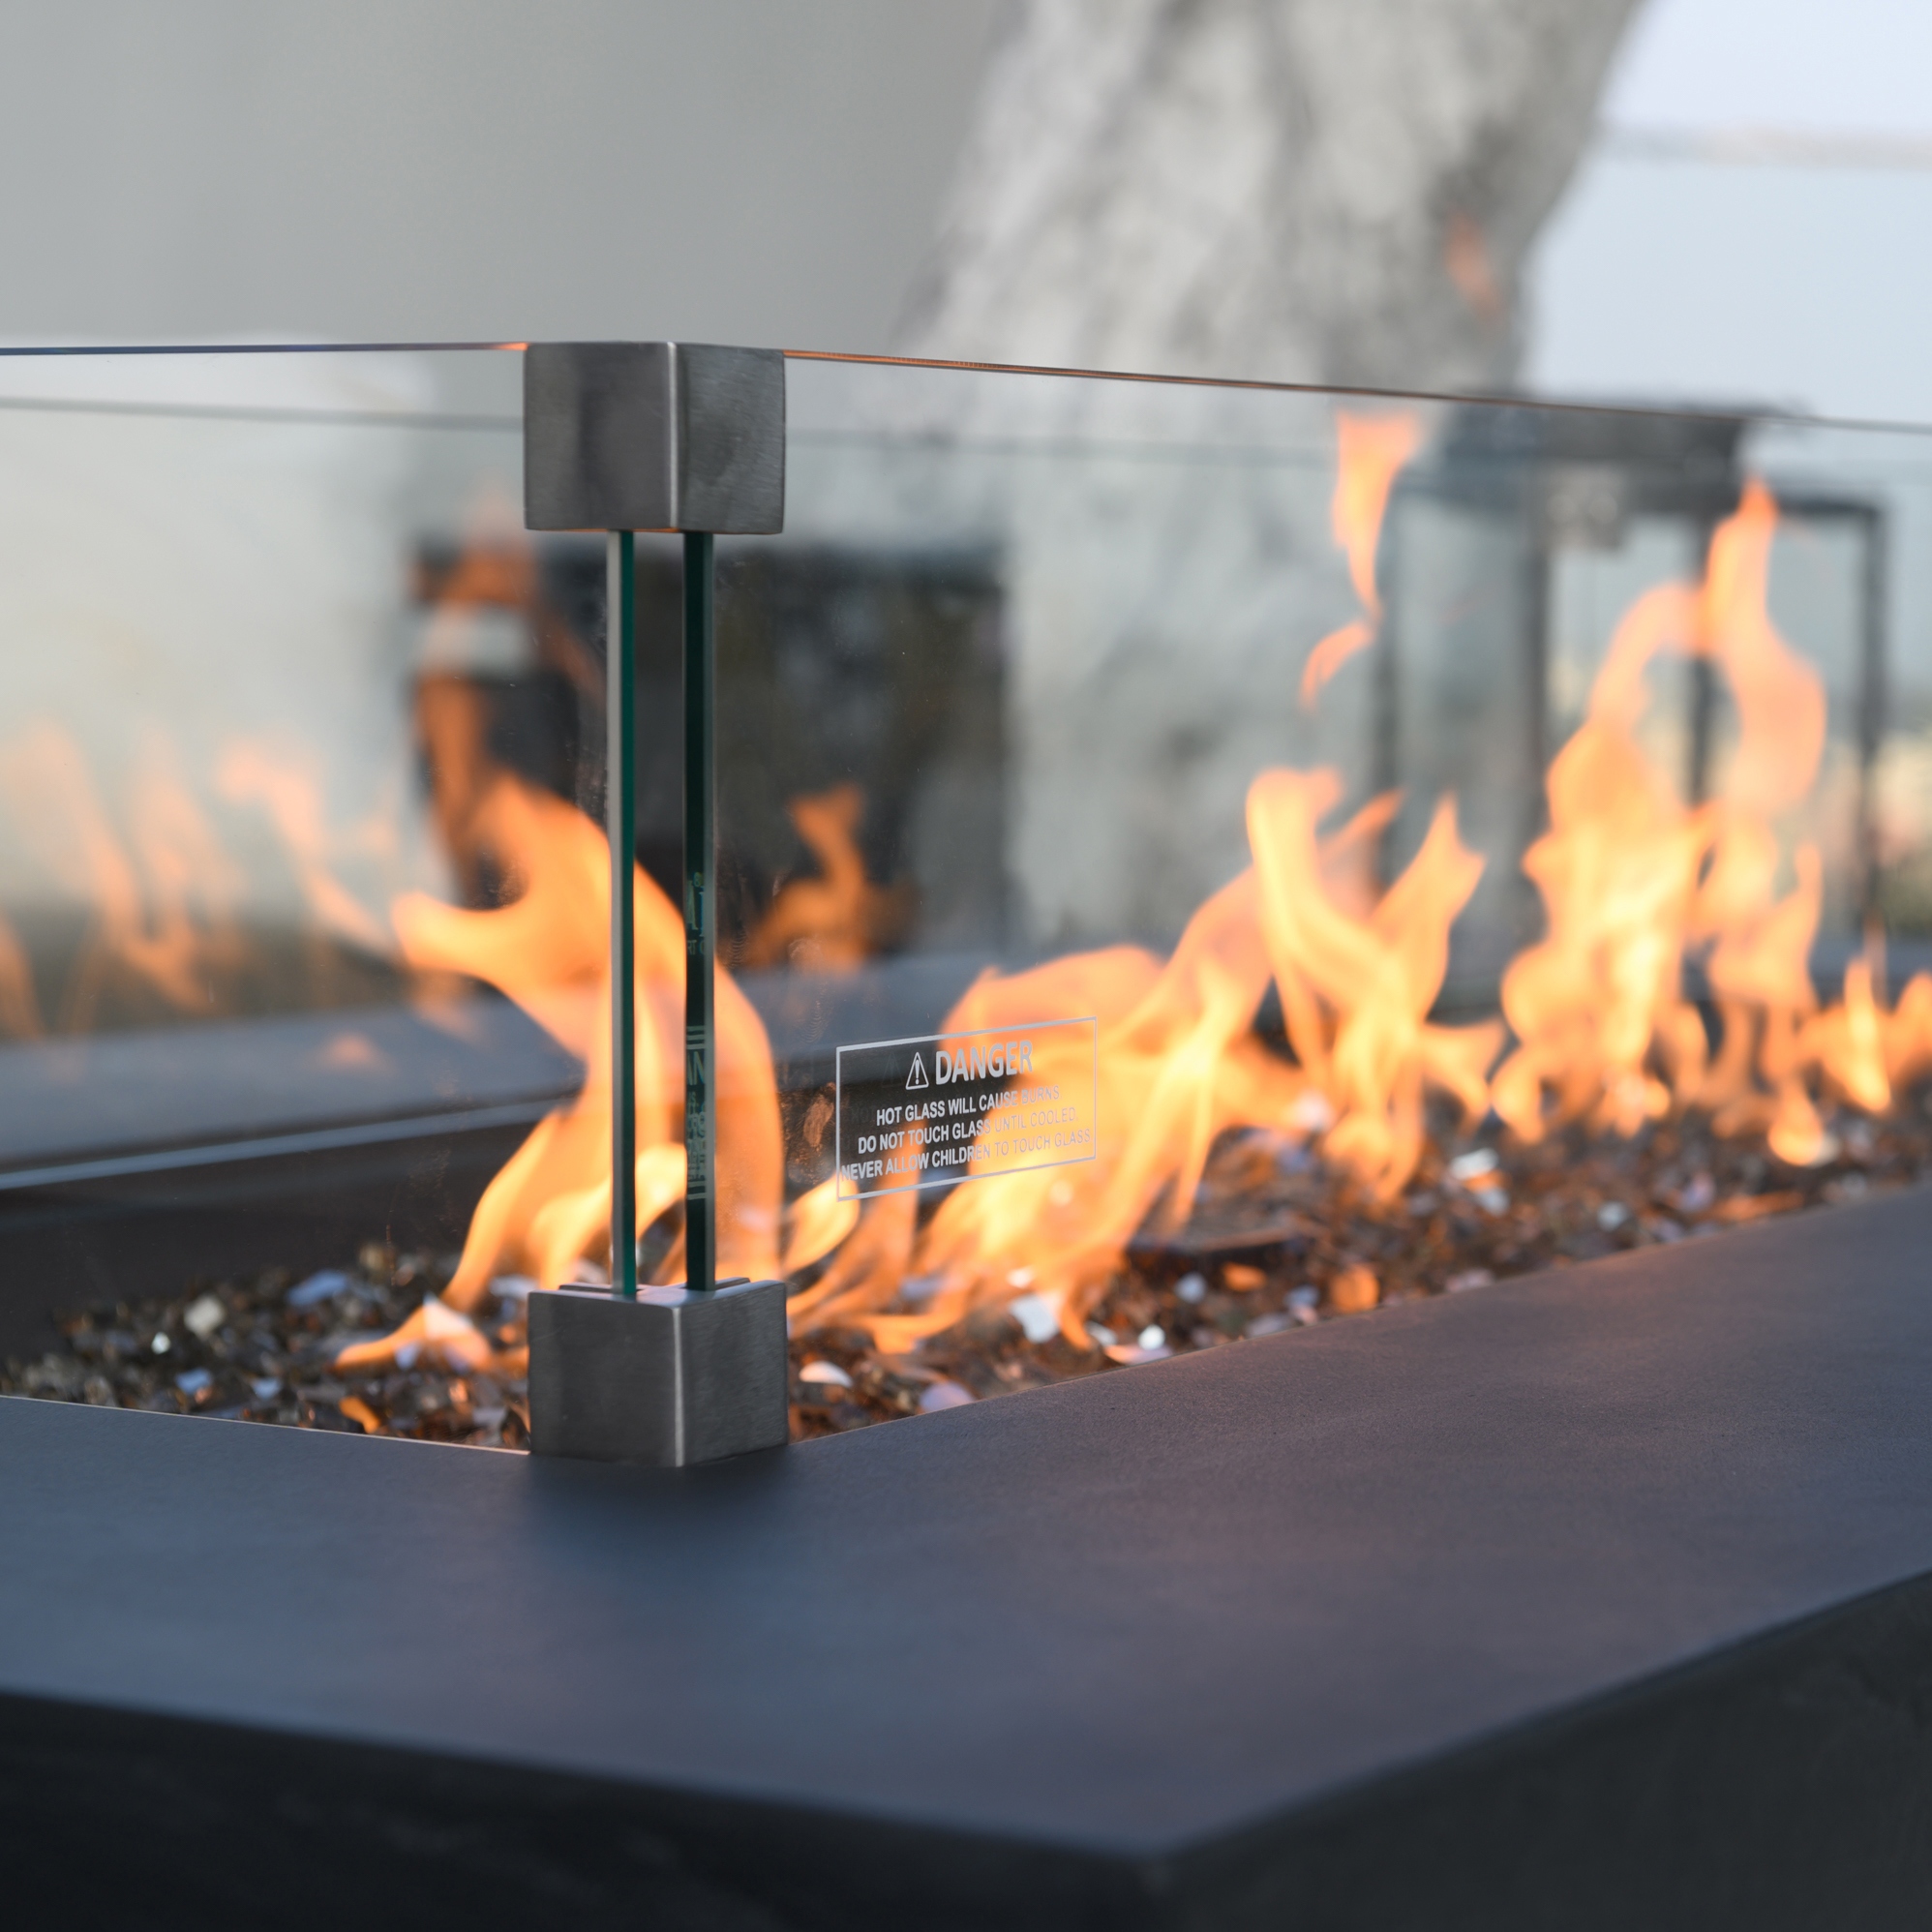 Cape Town firepit from Suns Lifestyle